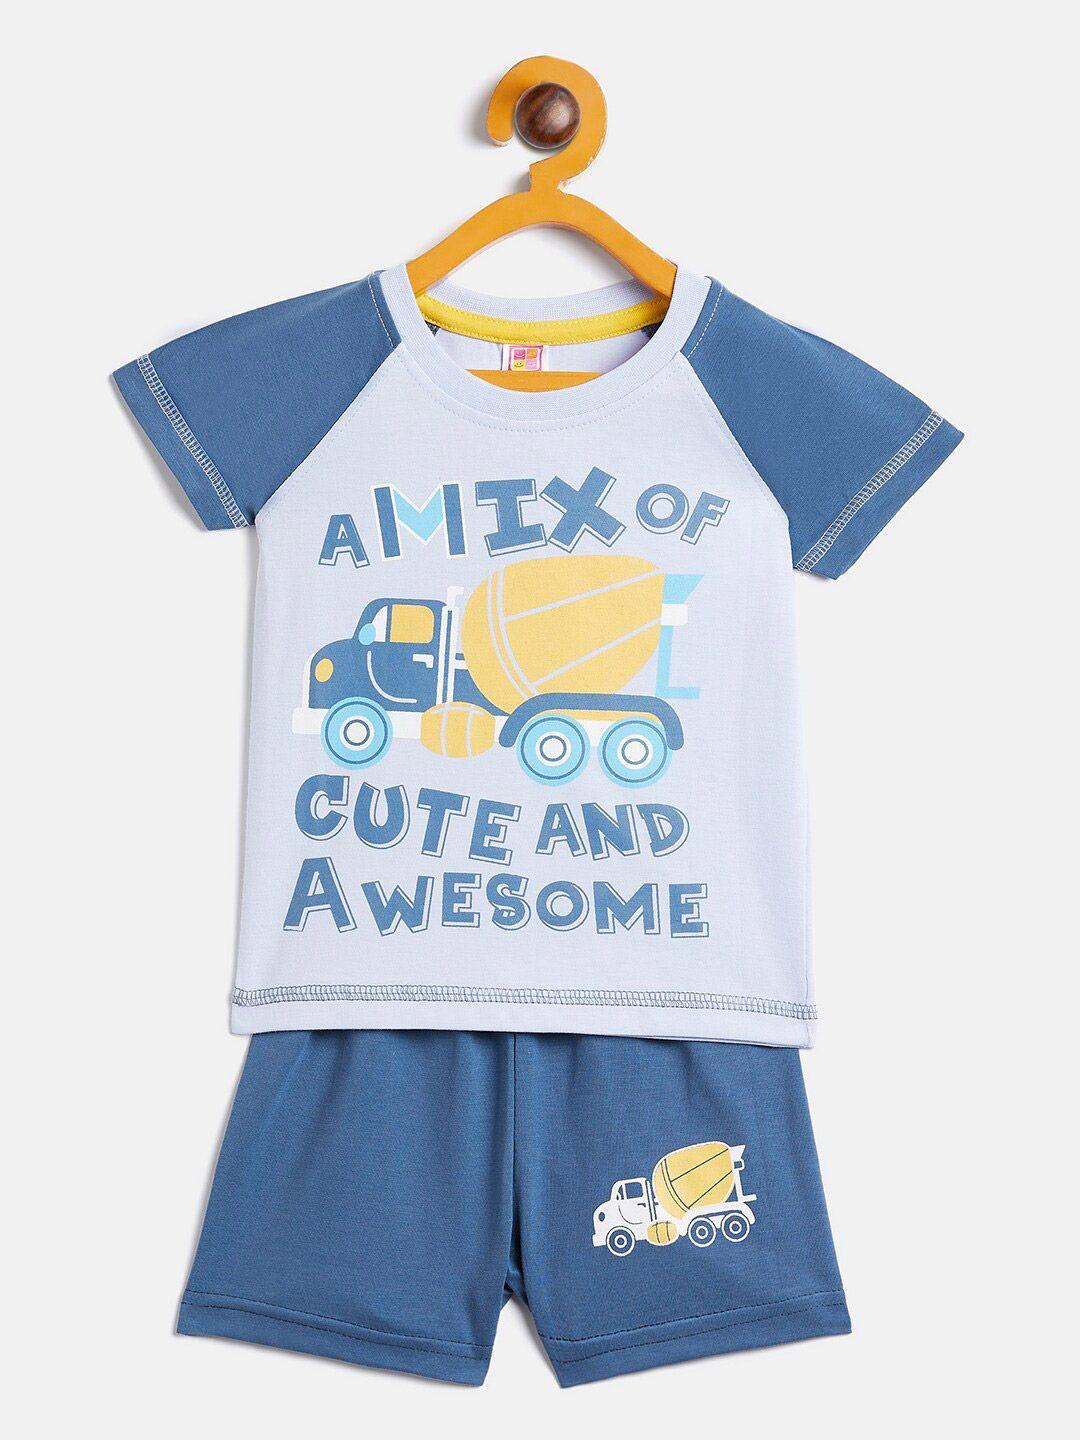 camey-unisex-kids-blue-&-grey-printed-t-shirt-with-shorts